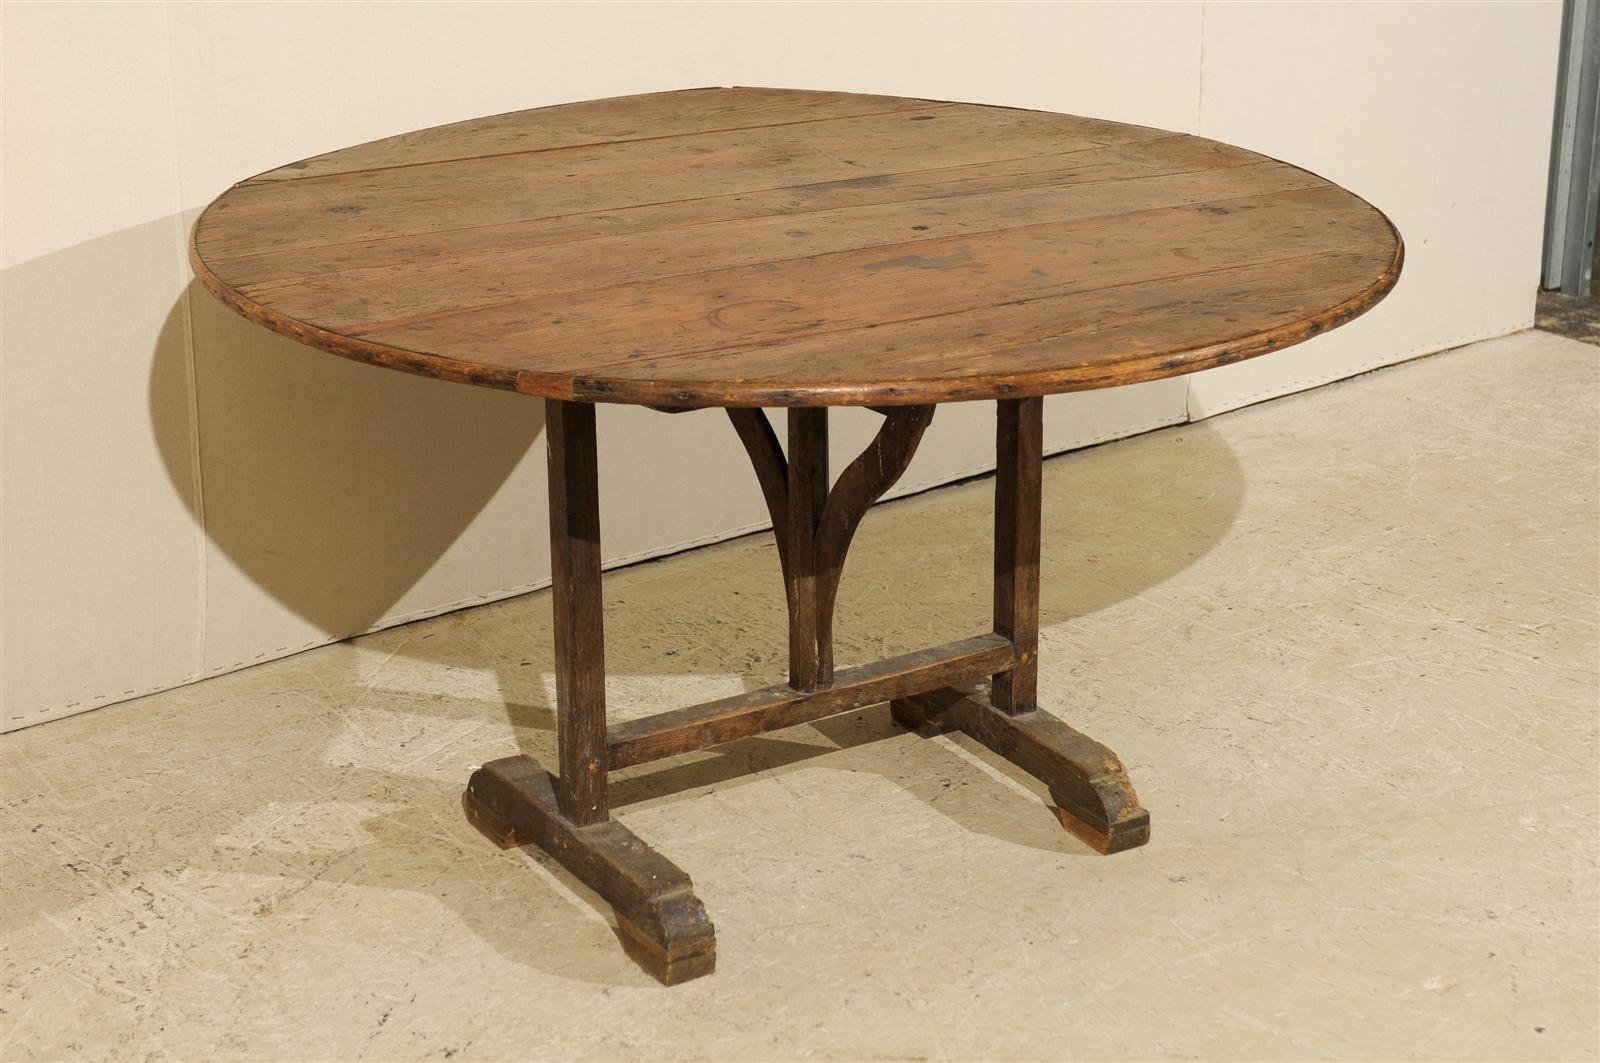 A French wine tasting table with typical tilt-top, from the 20th century. This round French table has some nice wear and patina on the wood top, reflective of age and use. Nice wood grain is also present throughout this piece. The butterfly wedge